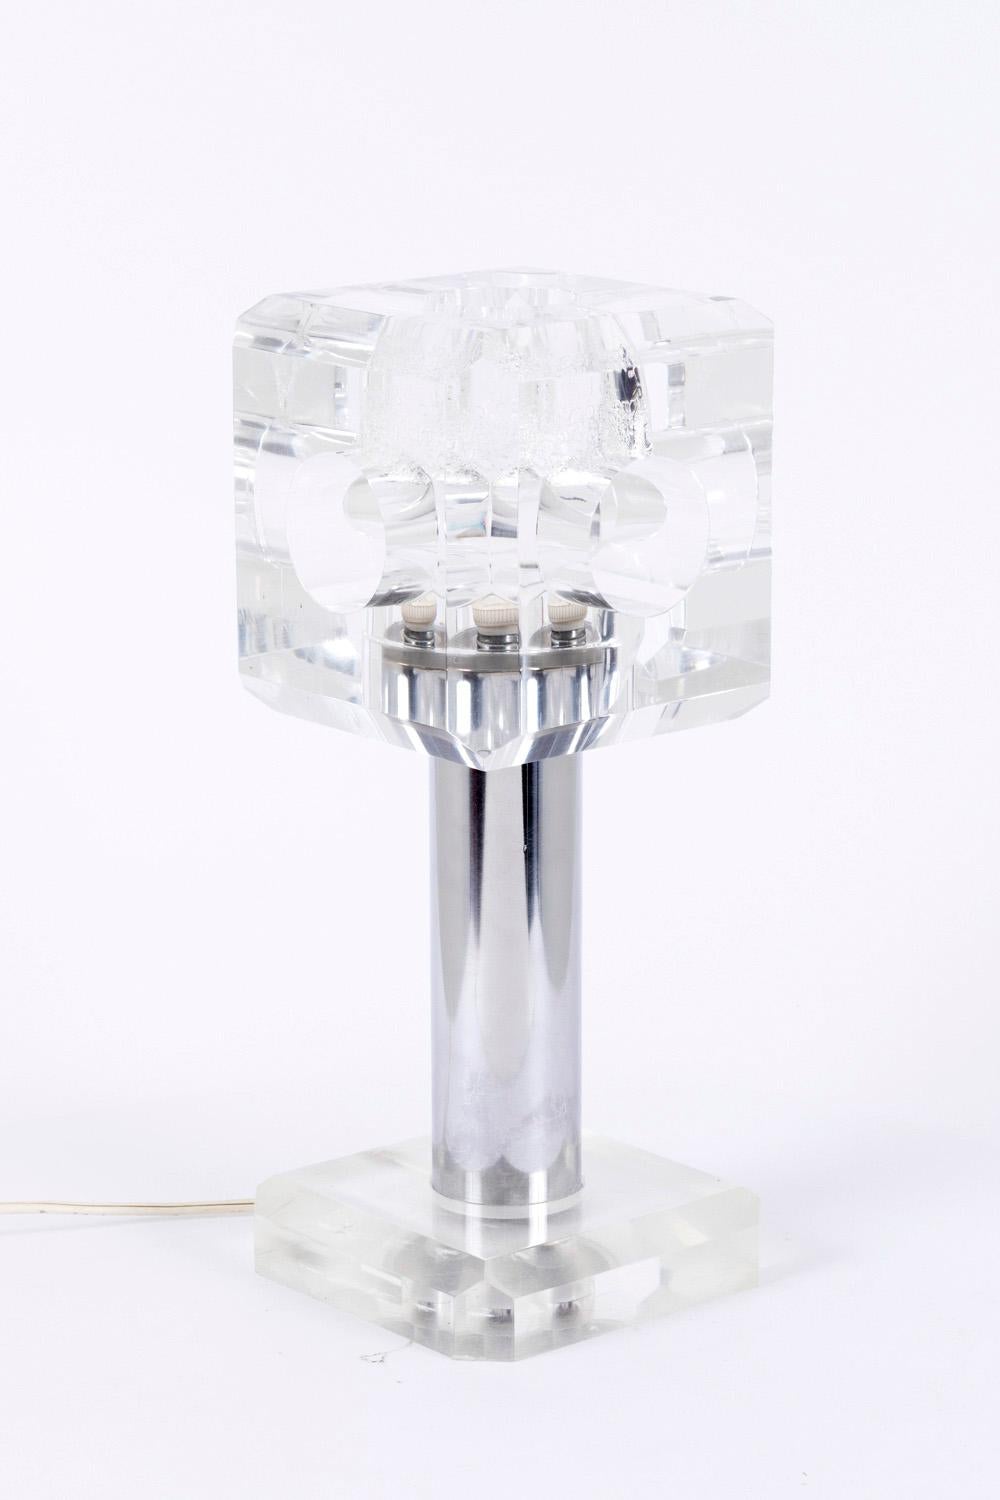 'Cube' lamp, with a plexiglas beveled edges cubic base, a stainless steel cylindrical shaft. Crowned with a cubic plexiglas lampshade. Every cube face is drilled with a cylindrical hole. Bubbles traces in the plexiglas cube due to the light bulb